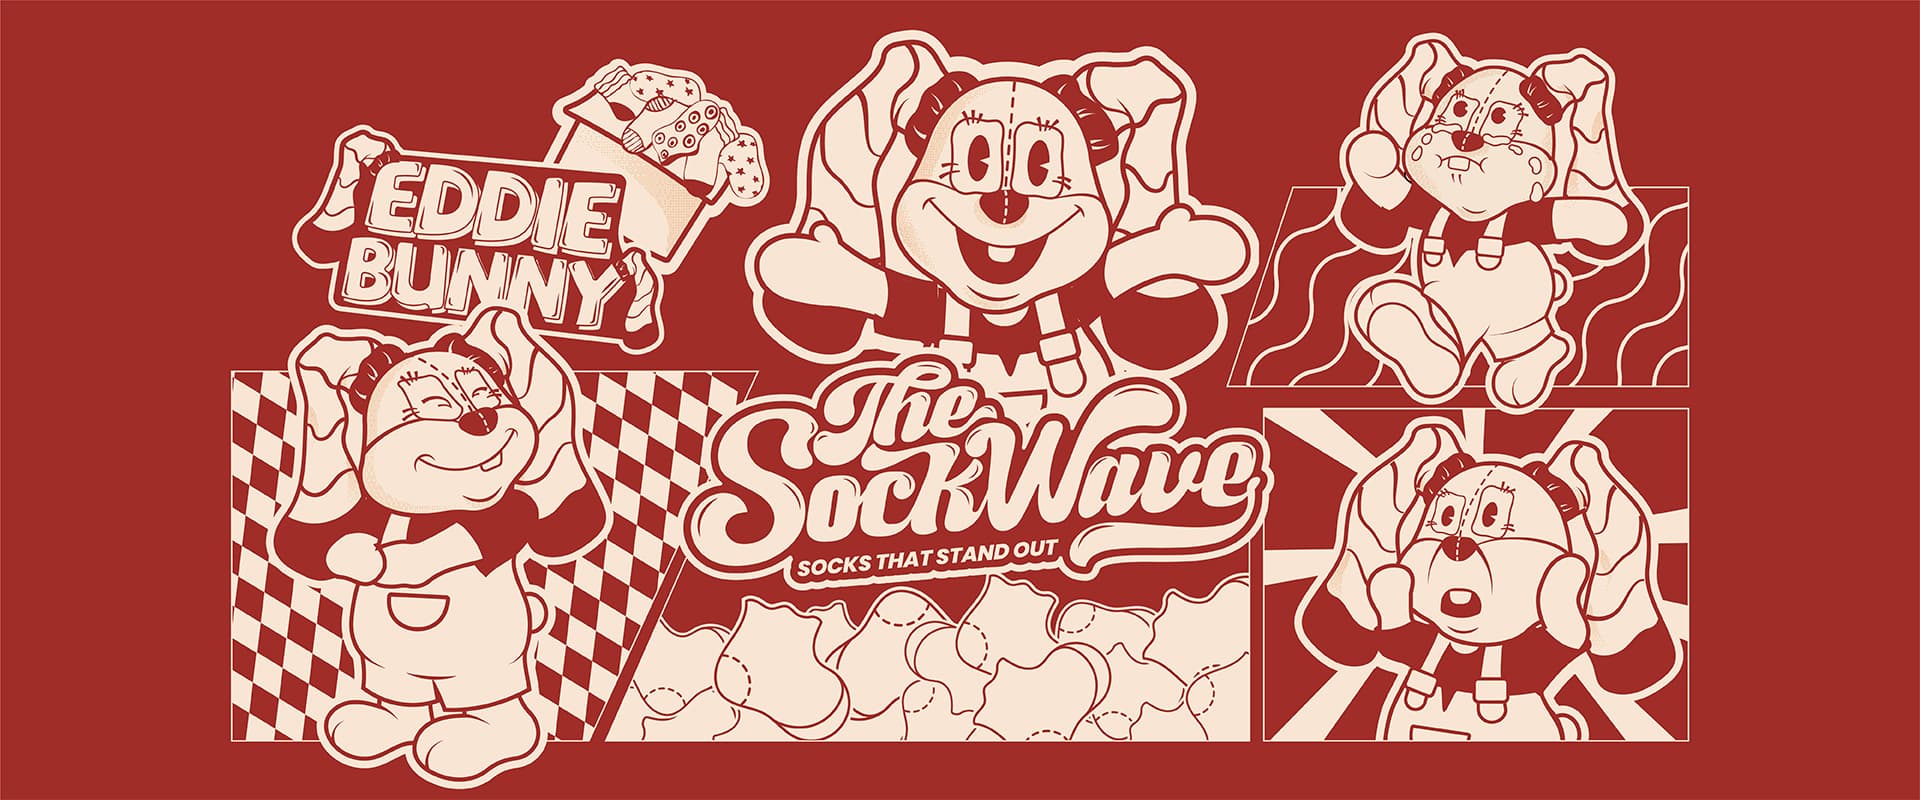 TheSockWave brand cover